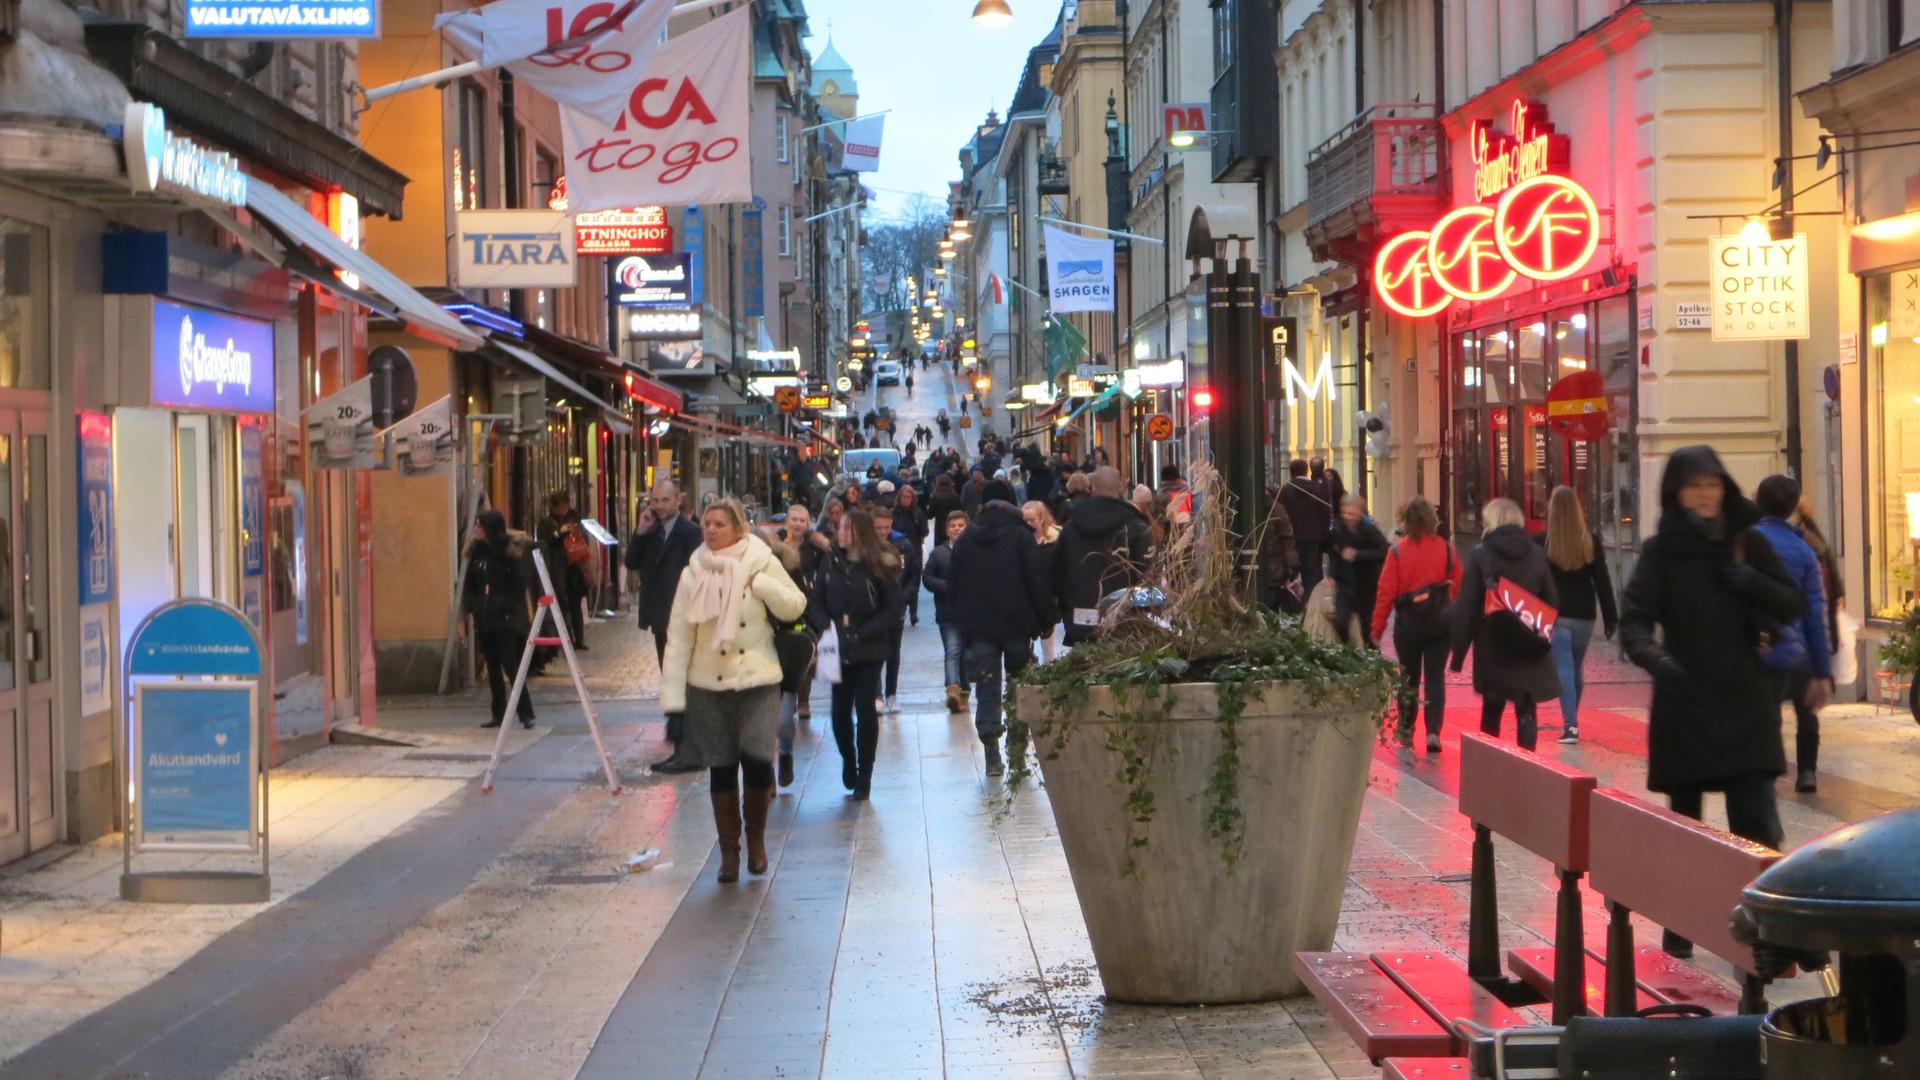 Urban planners in Stockholm are transforming their city, prioritizing not for vehicles, but for people. Their vision is called "The Walkable City." 